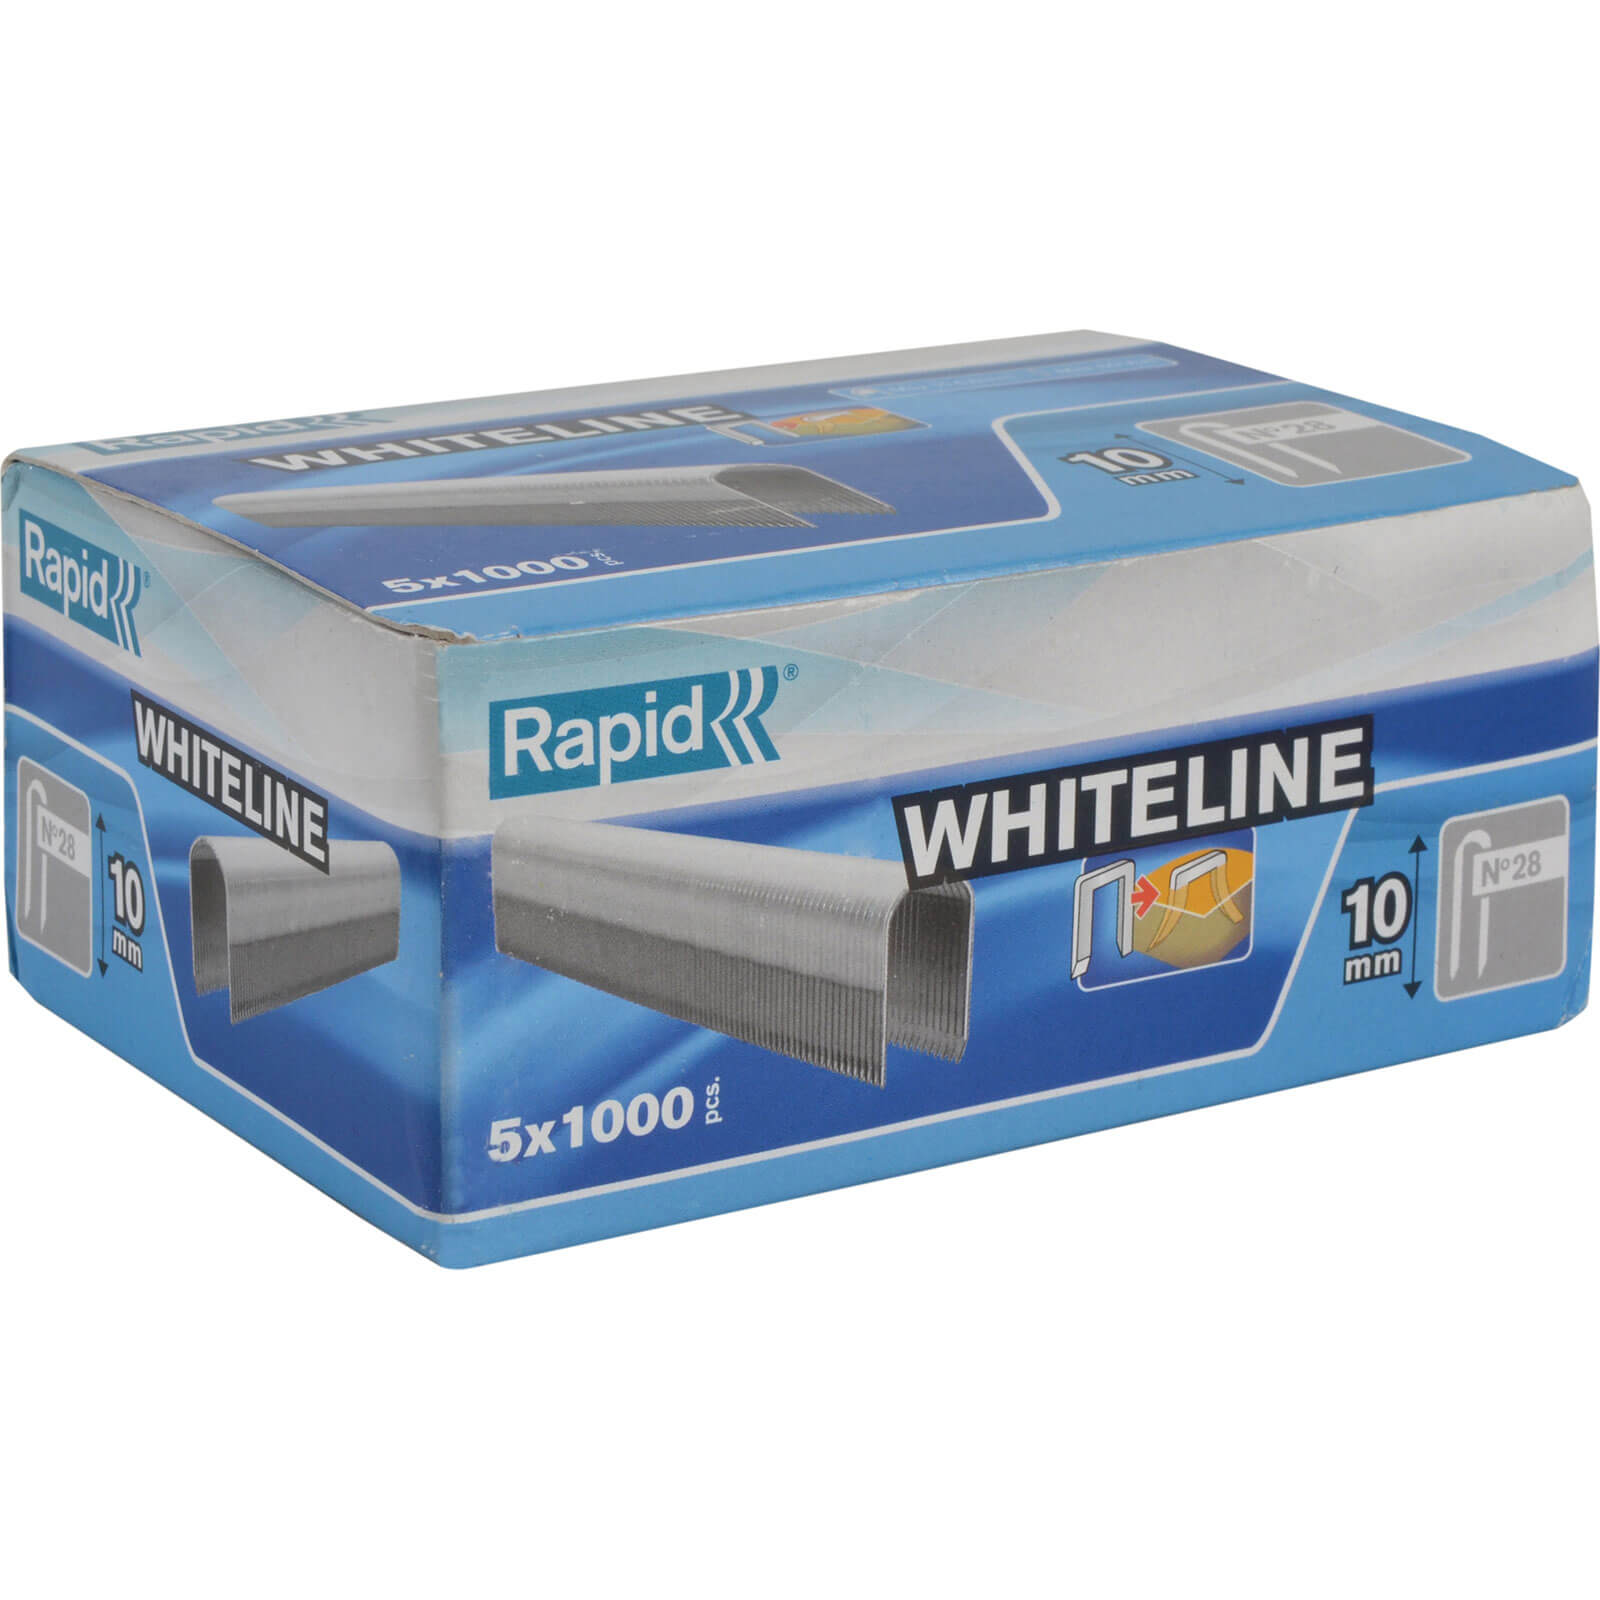 Image of Rapid 28 White Staples 10mm Pack of 5000